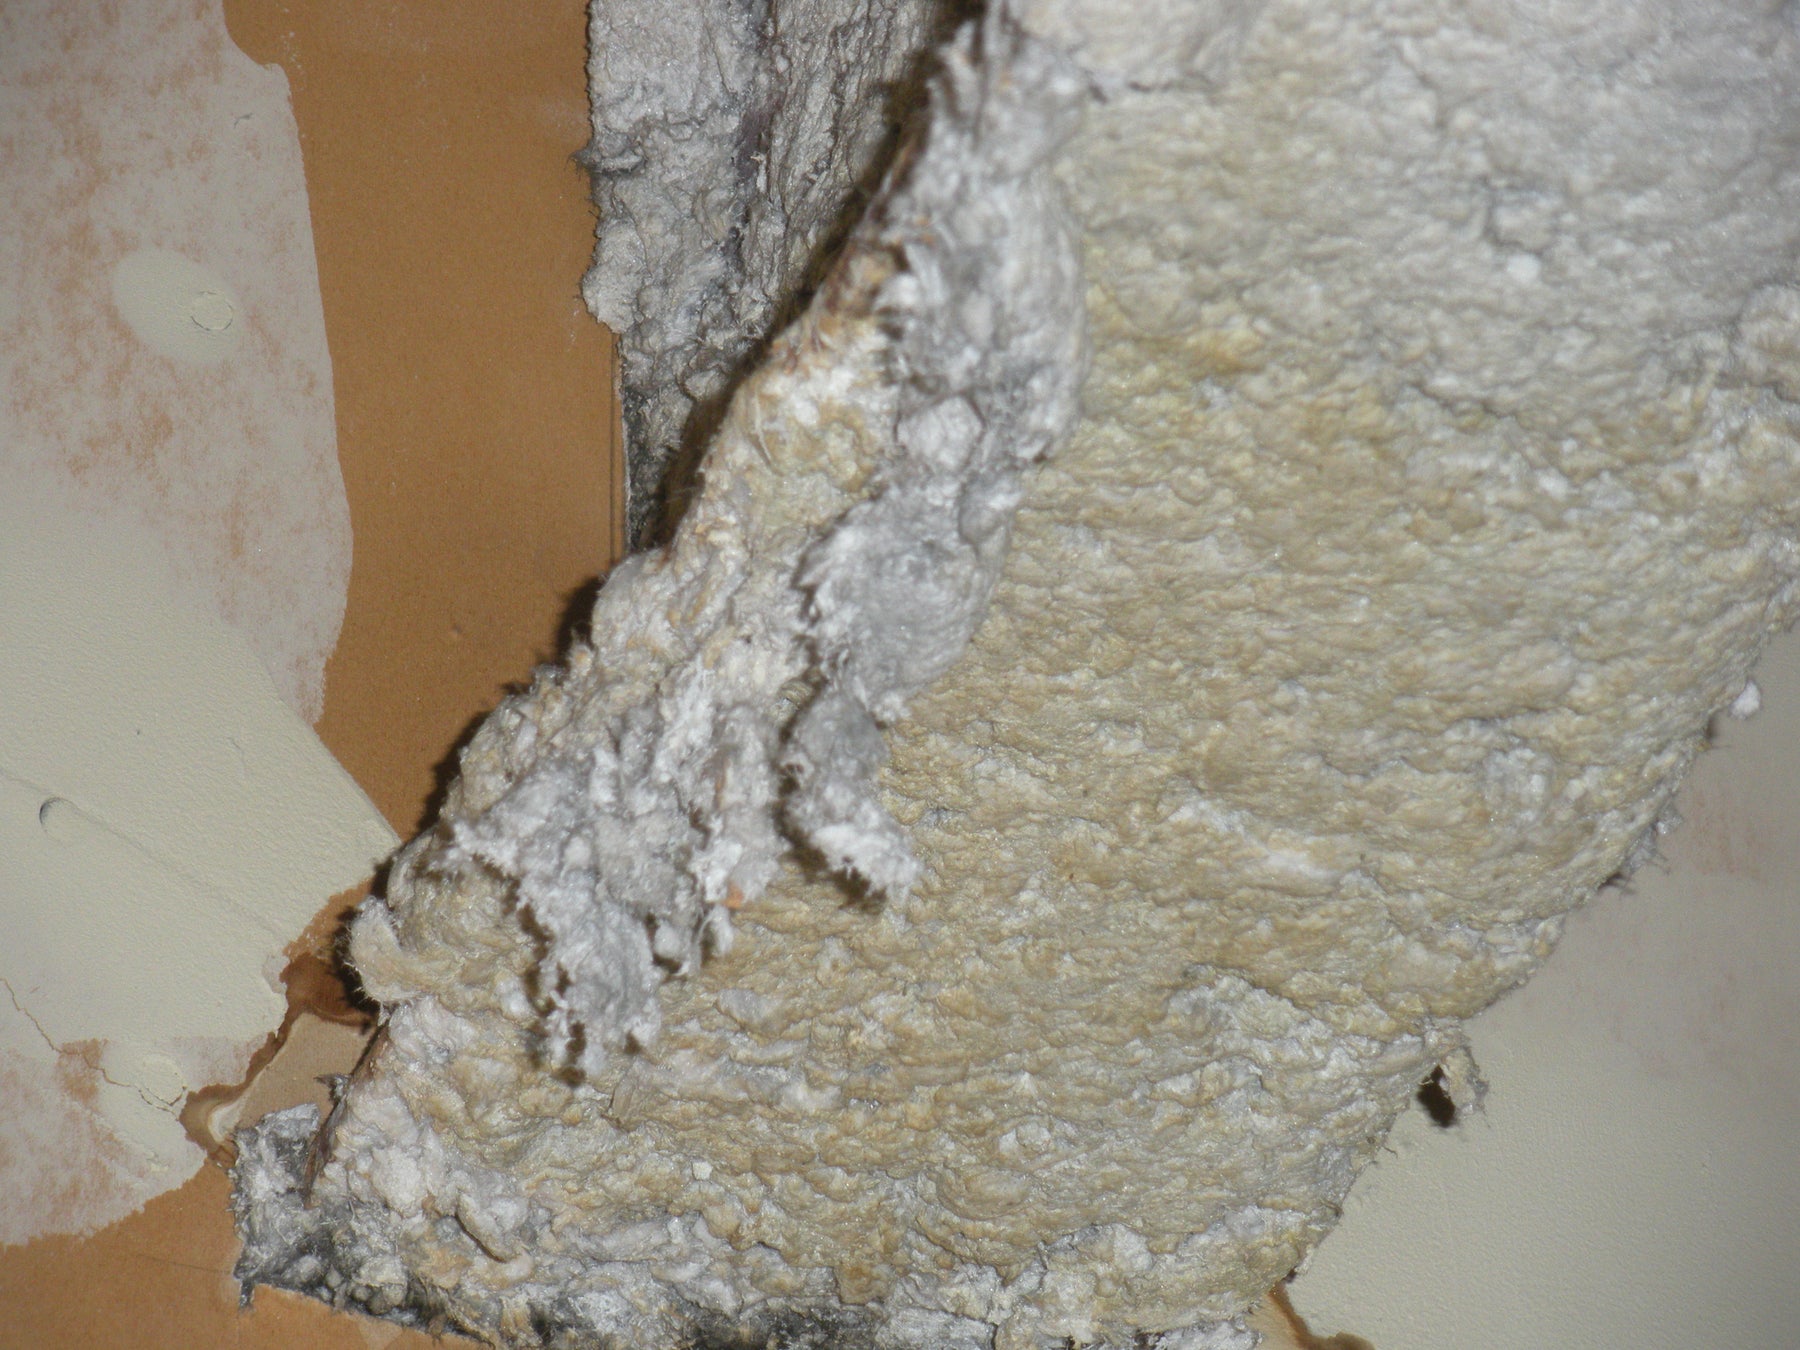 Exposed asbestos insulation material, highlighting the necessity for the best air purifier for asbestos to reduce airborne fibers.